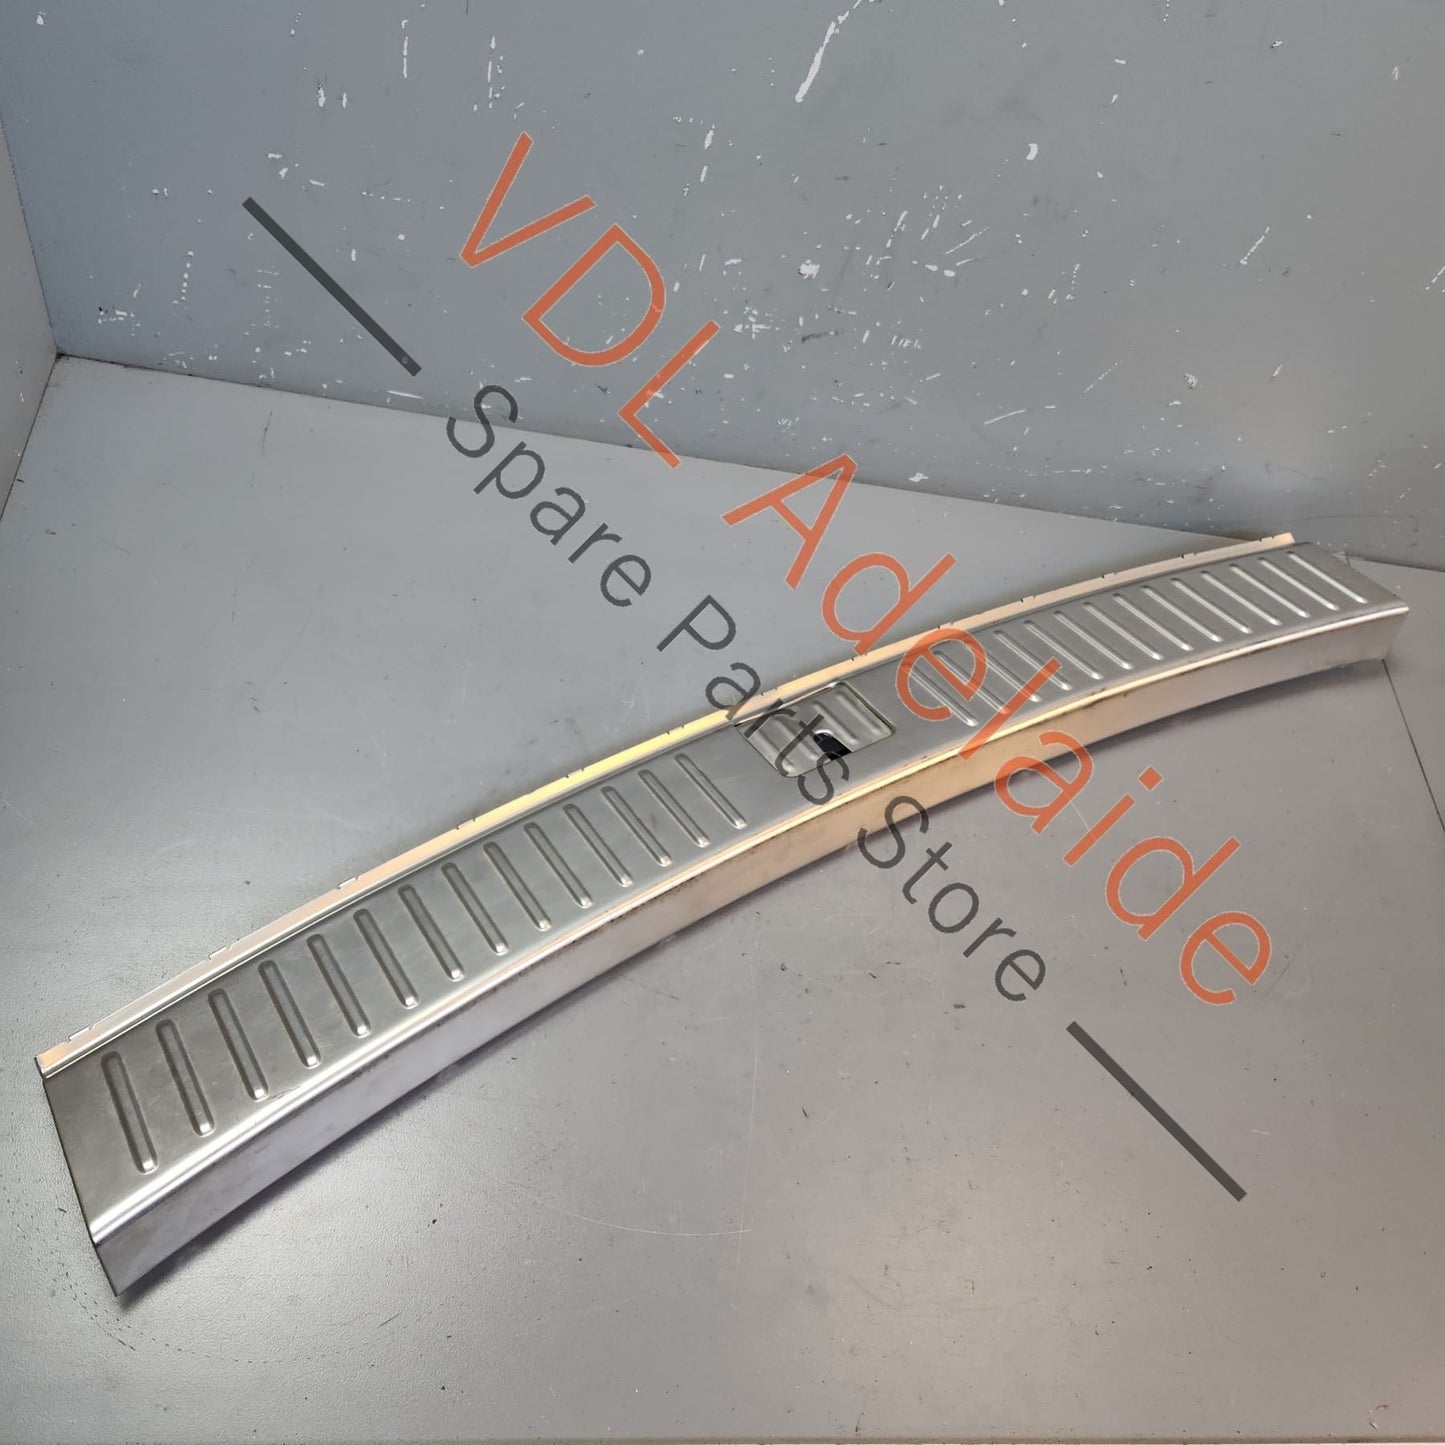 9Y0864483B1E0 9Y0864483G1E0 9Y0864483G1E0  Porsche Cayenne E3 9YA 9YB Rear Luggage Compartment Load Edge Trim Stainless Steel Chrome 9Y0864483B 1E0 9Y0864483G 1E0